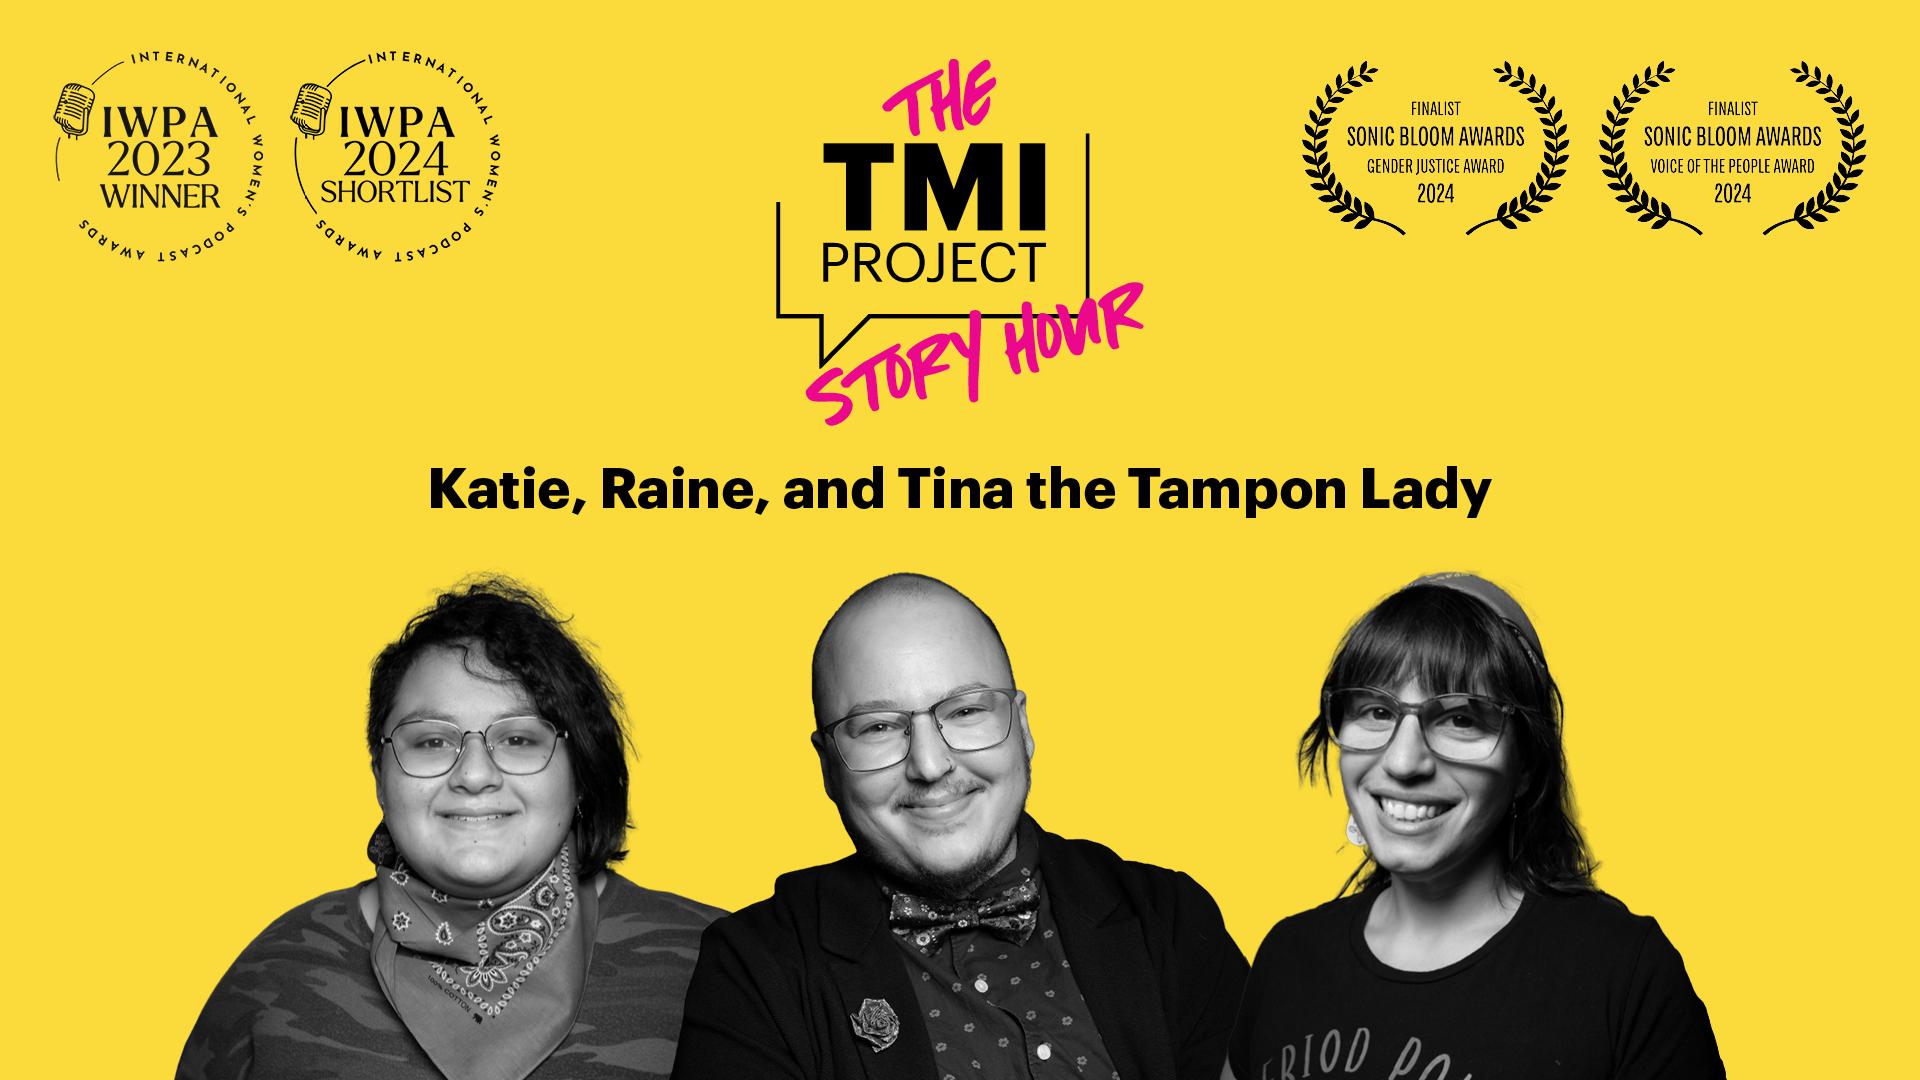 The TMI Project Story Hour: Tina the Tampon Lady